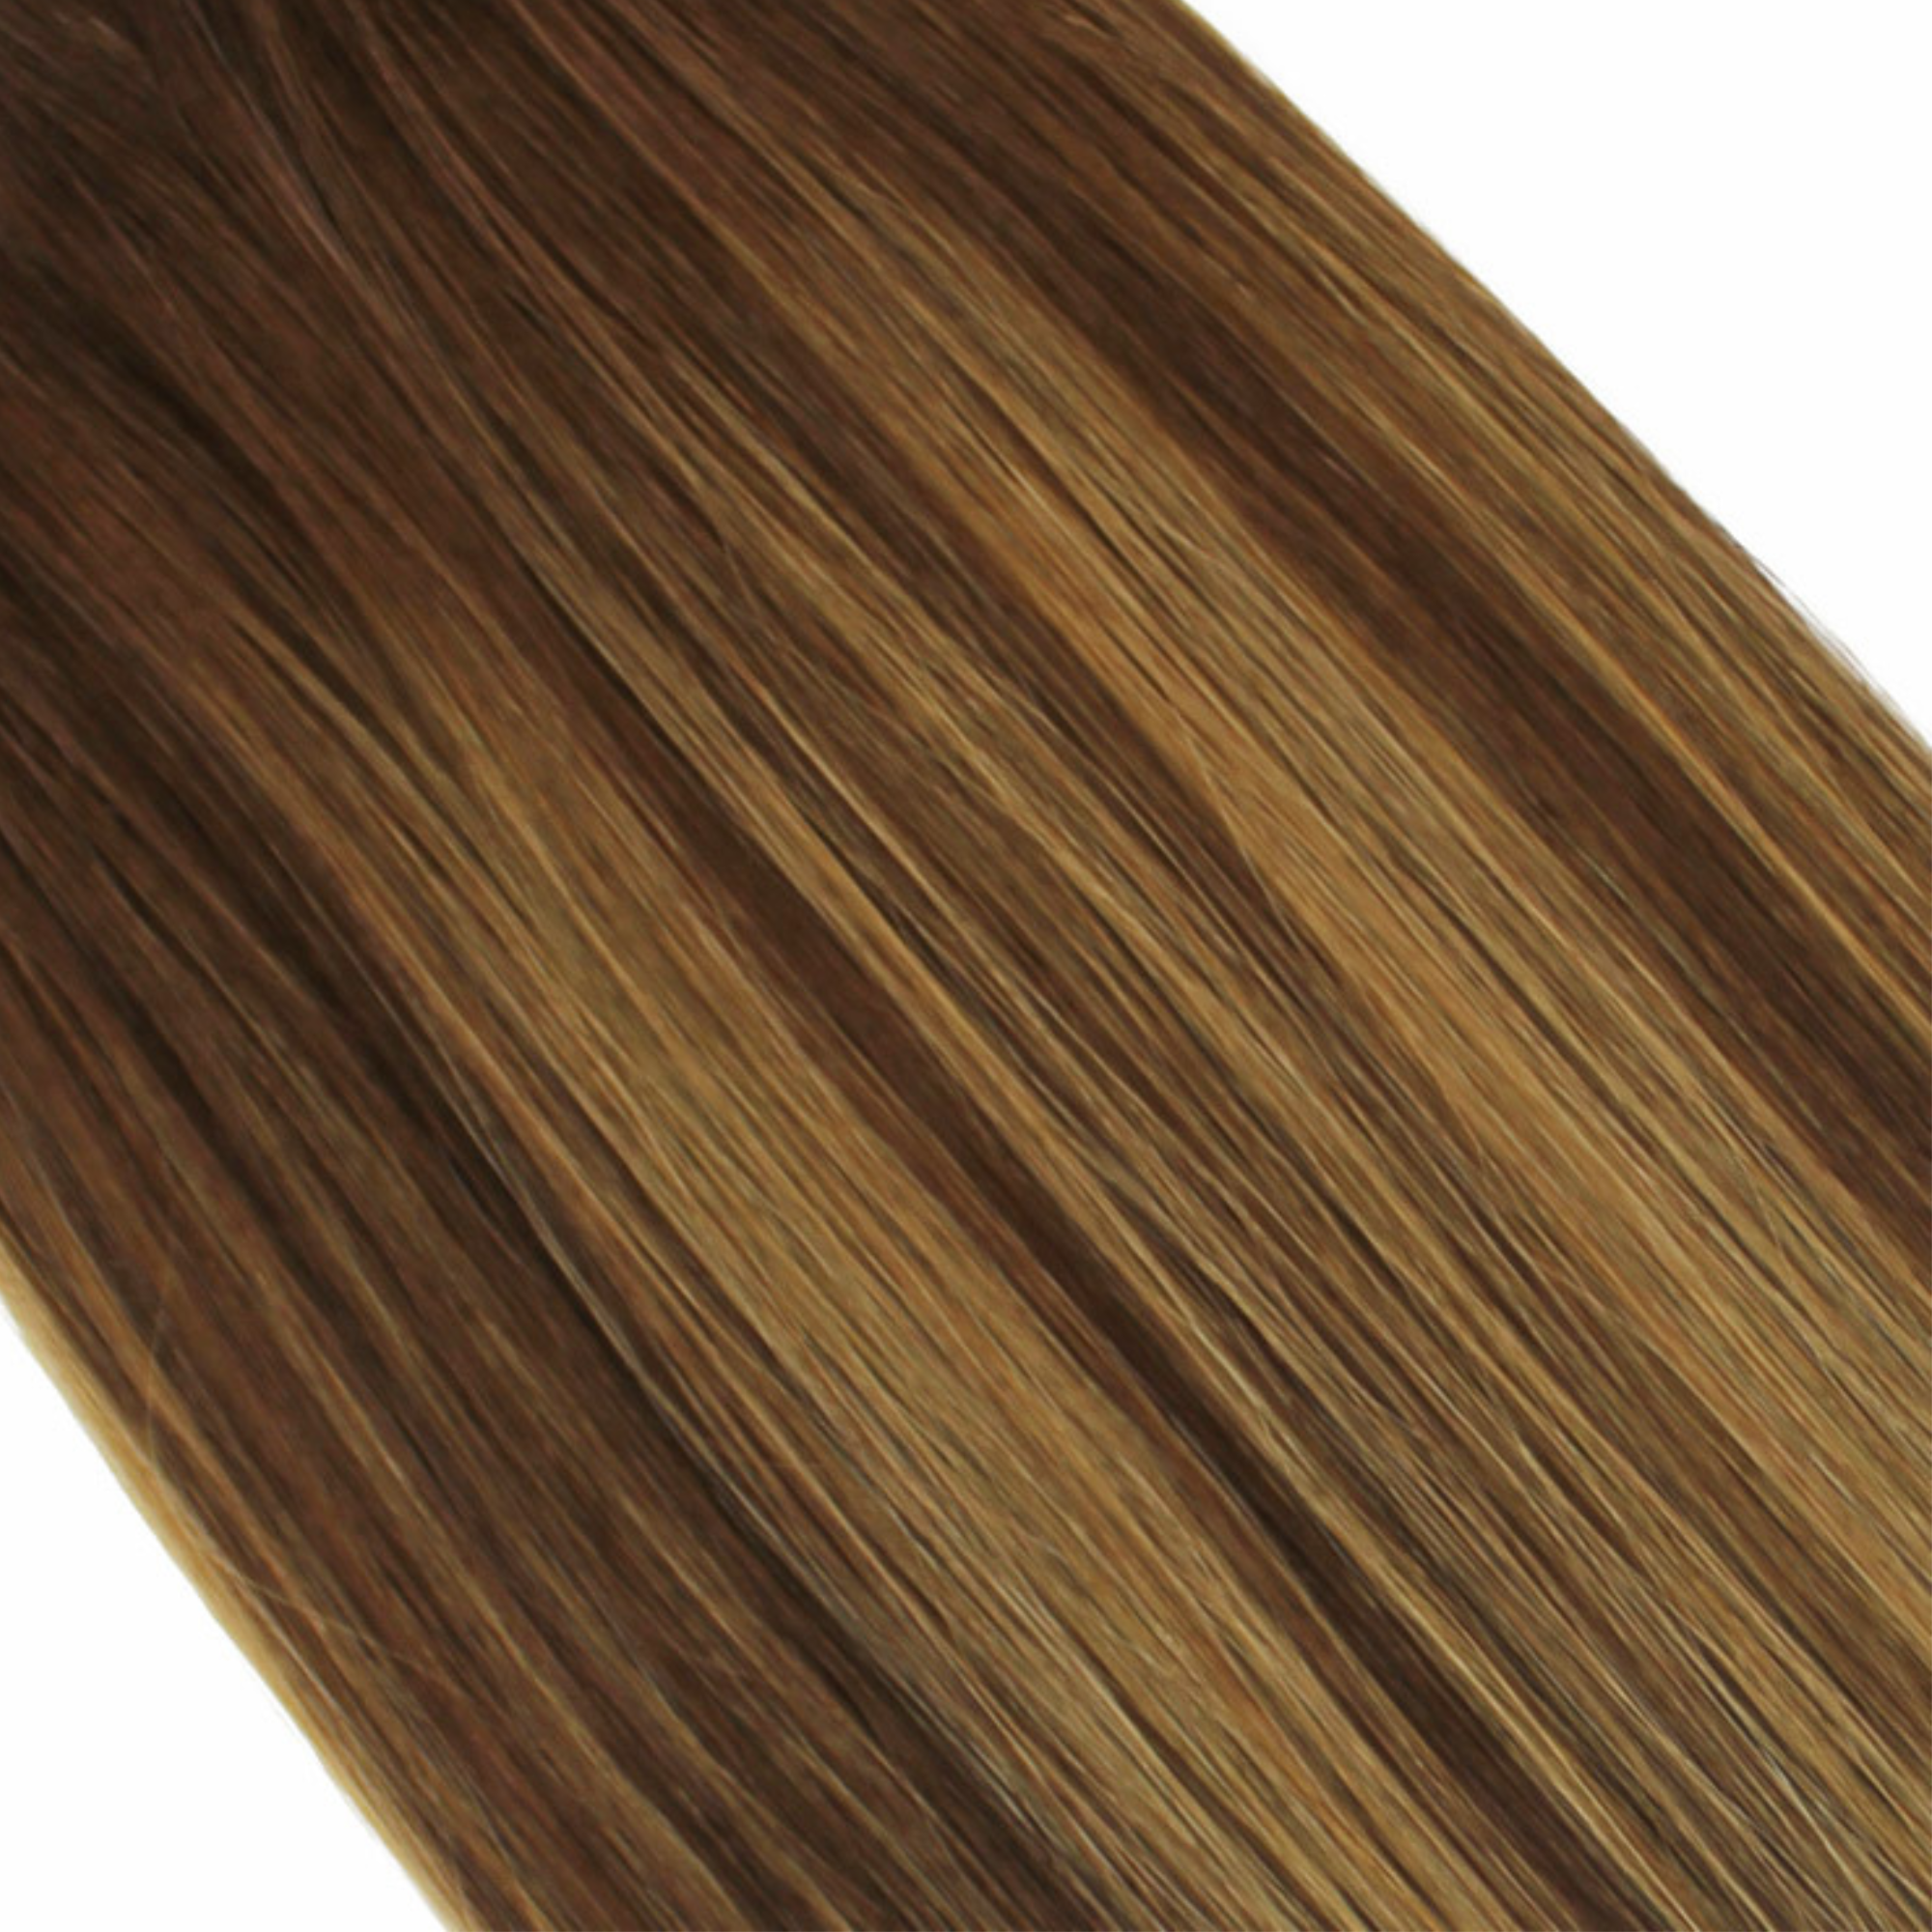 "hair rehab london 20" length 180 grams weight luxe clip-in hair extensions shade titled rooted bronze"